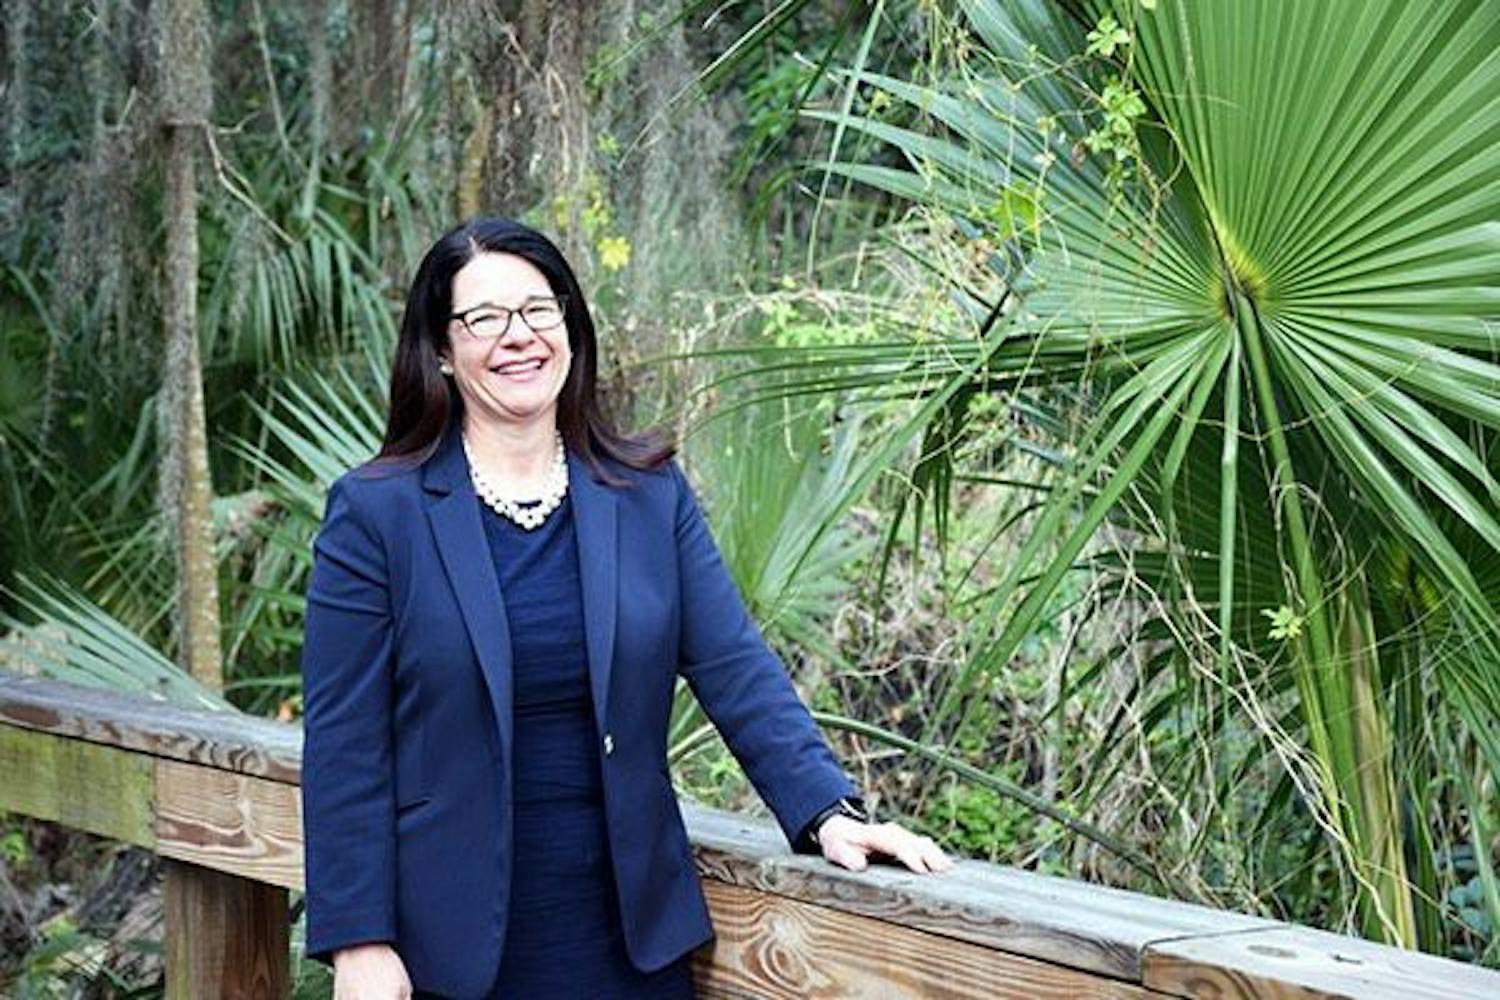 Venita&nbsp;Sposetti, 67, the Associate Dean of Education for the UF College of Dentistry, announced Jan. 30 that she will retire in October.